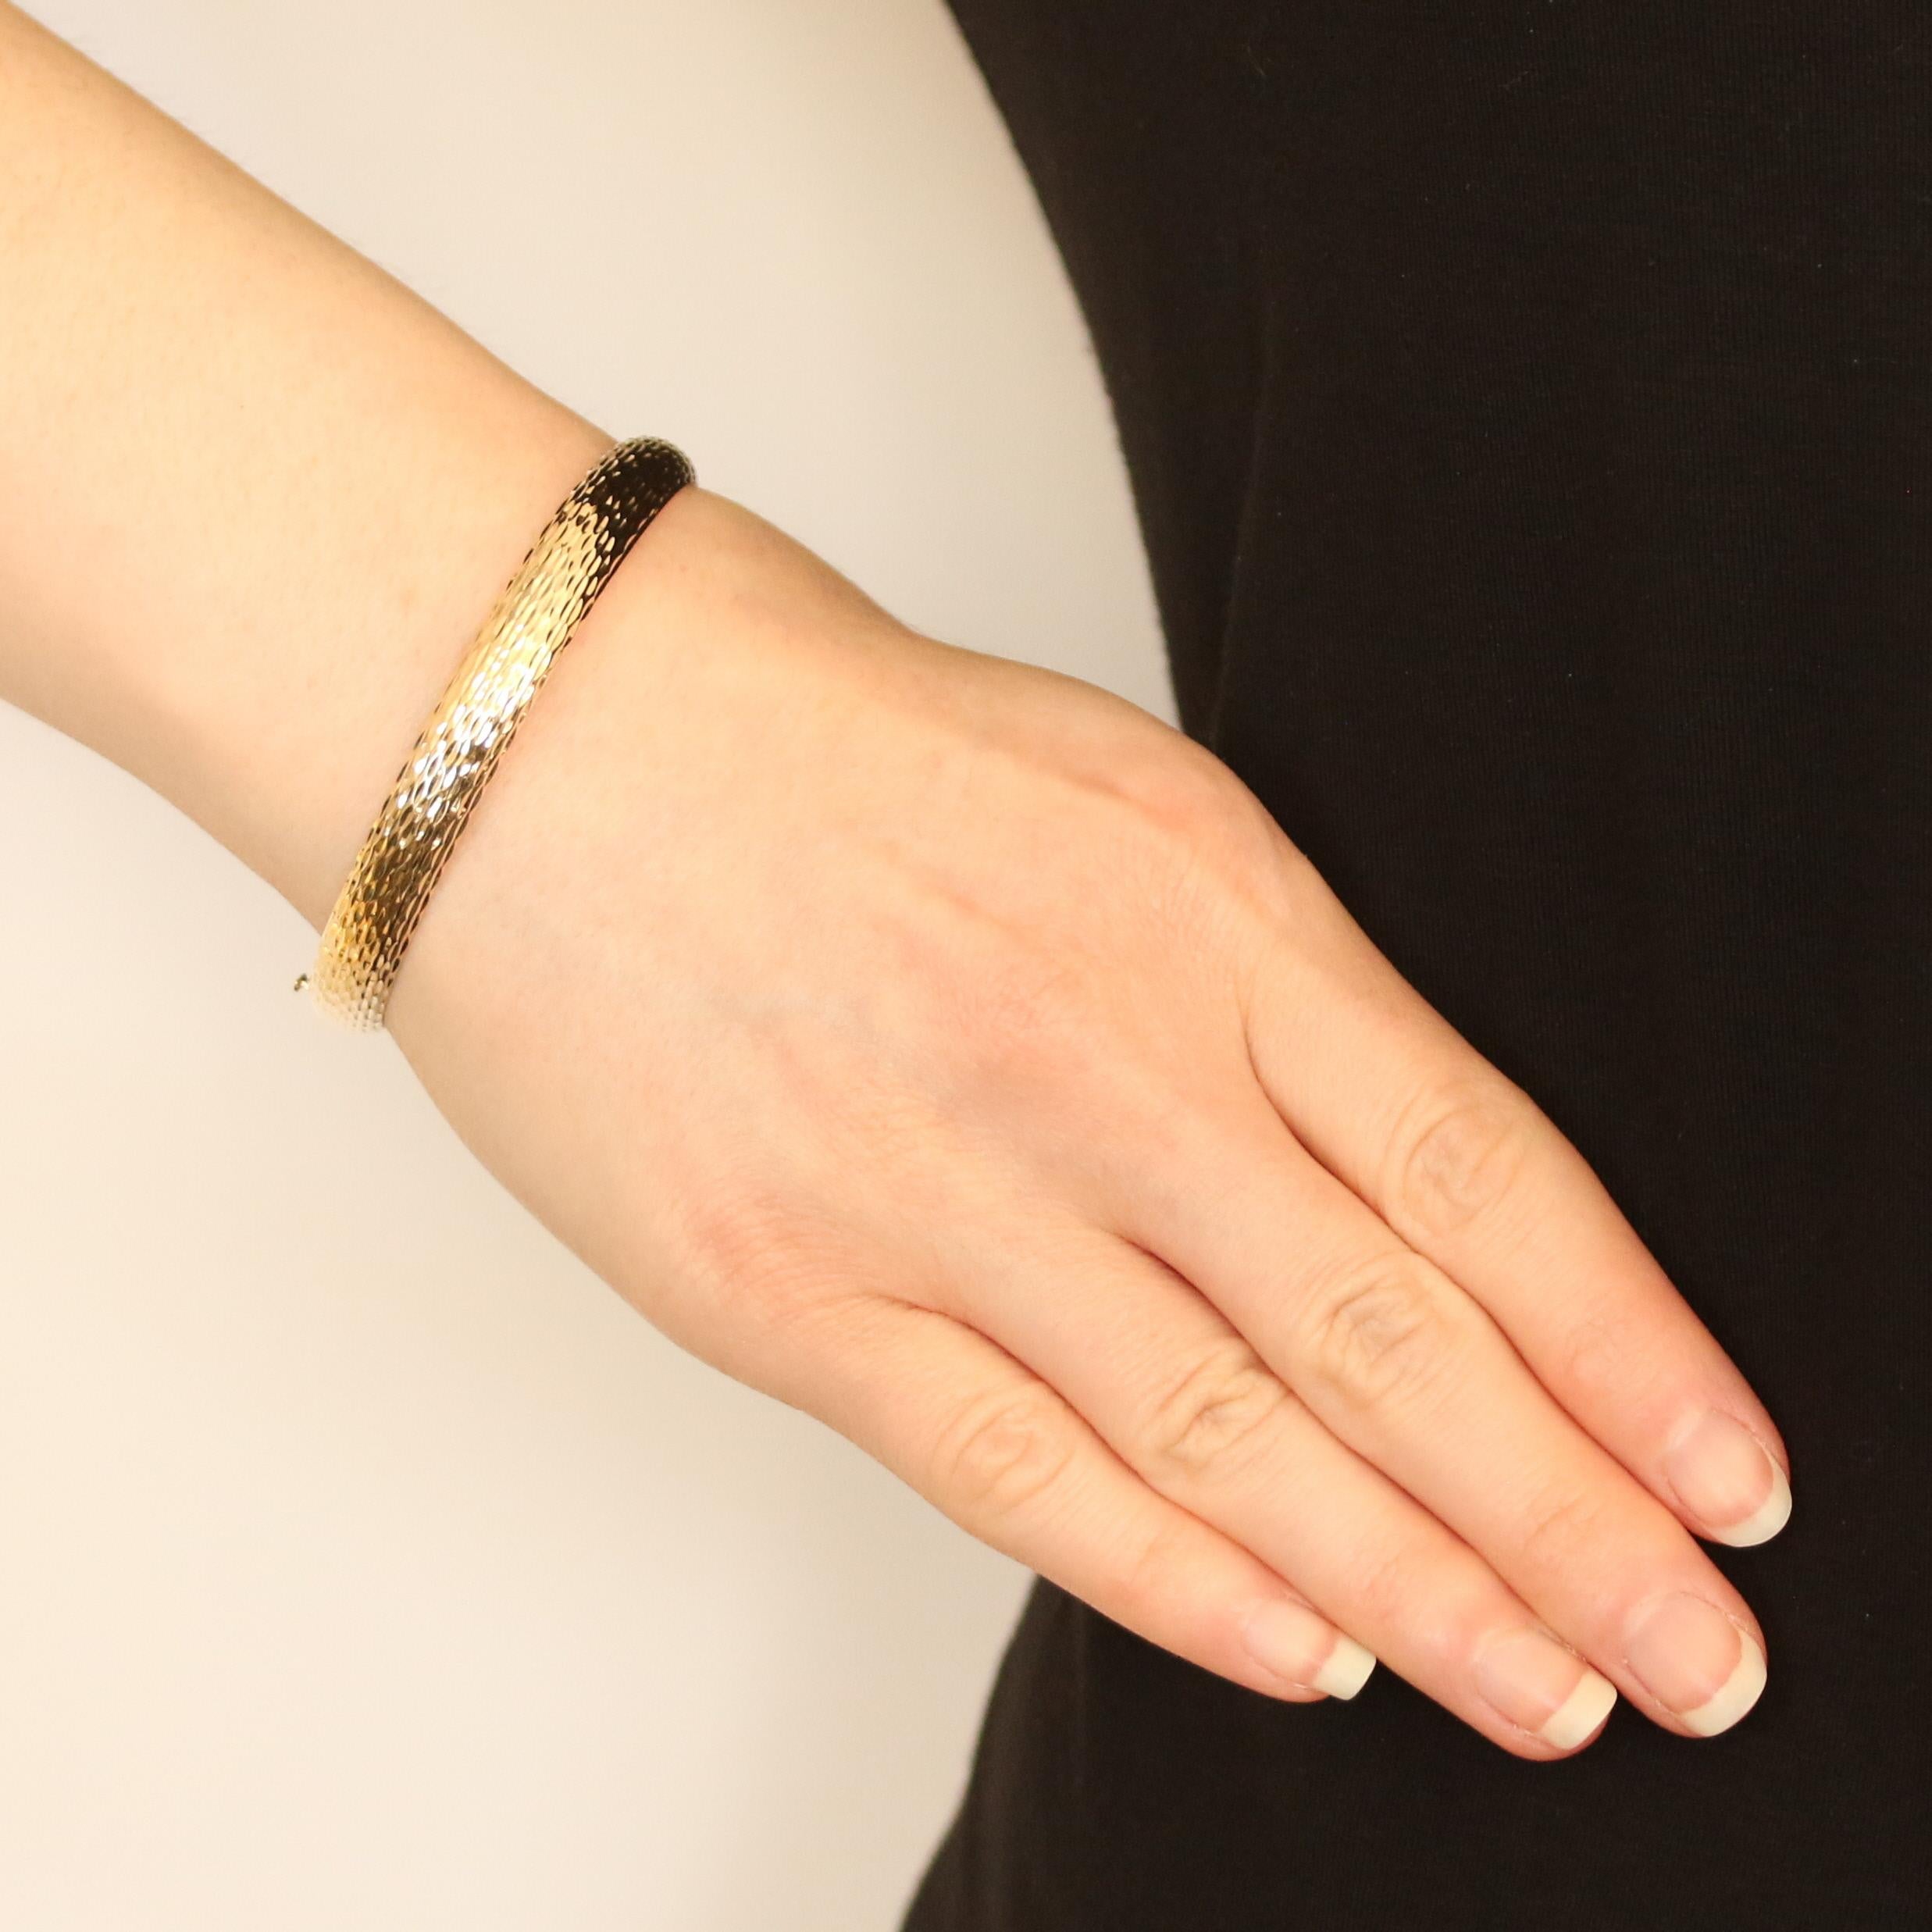 Metal Content: 14k Yellow Gold
 
 Bracelet Style: Hinged Bangle
 Closure Type: Slide Clasp
 Features: Etched & Smooth Finishes
 
 Measurements: 
 Inner circumference: 7